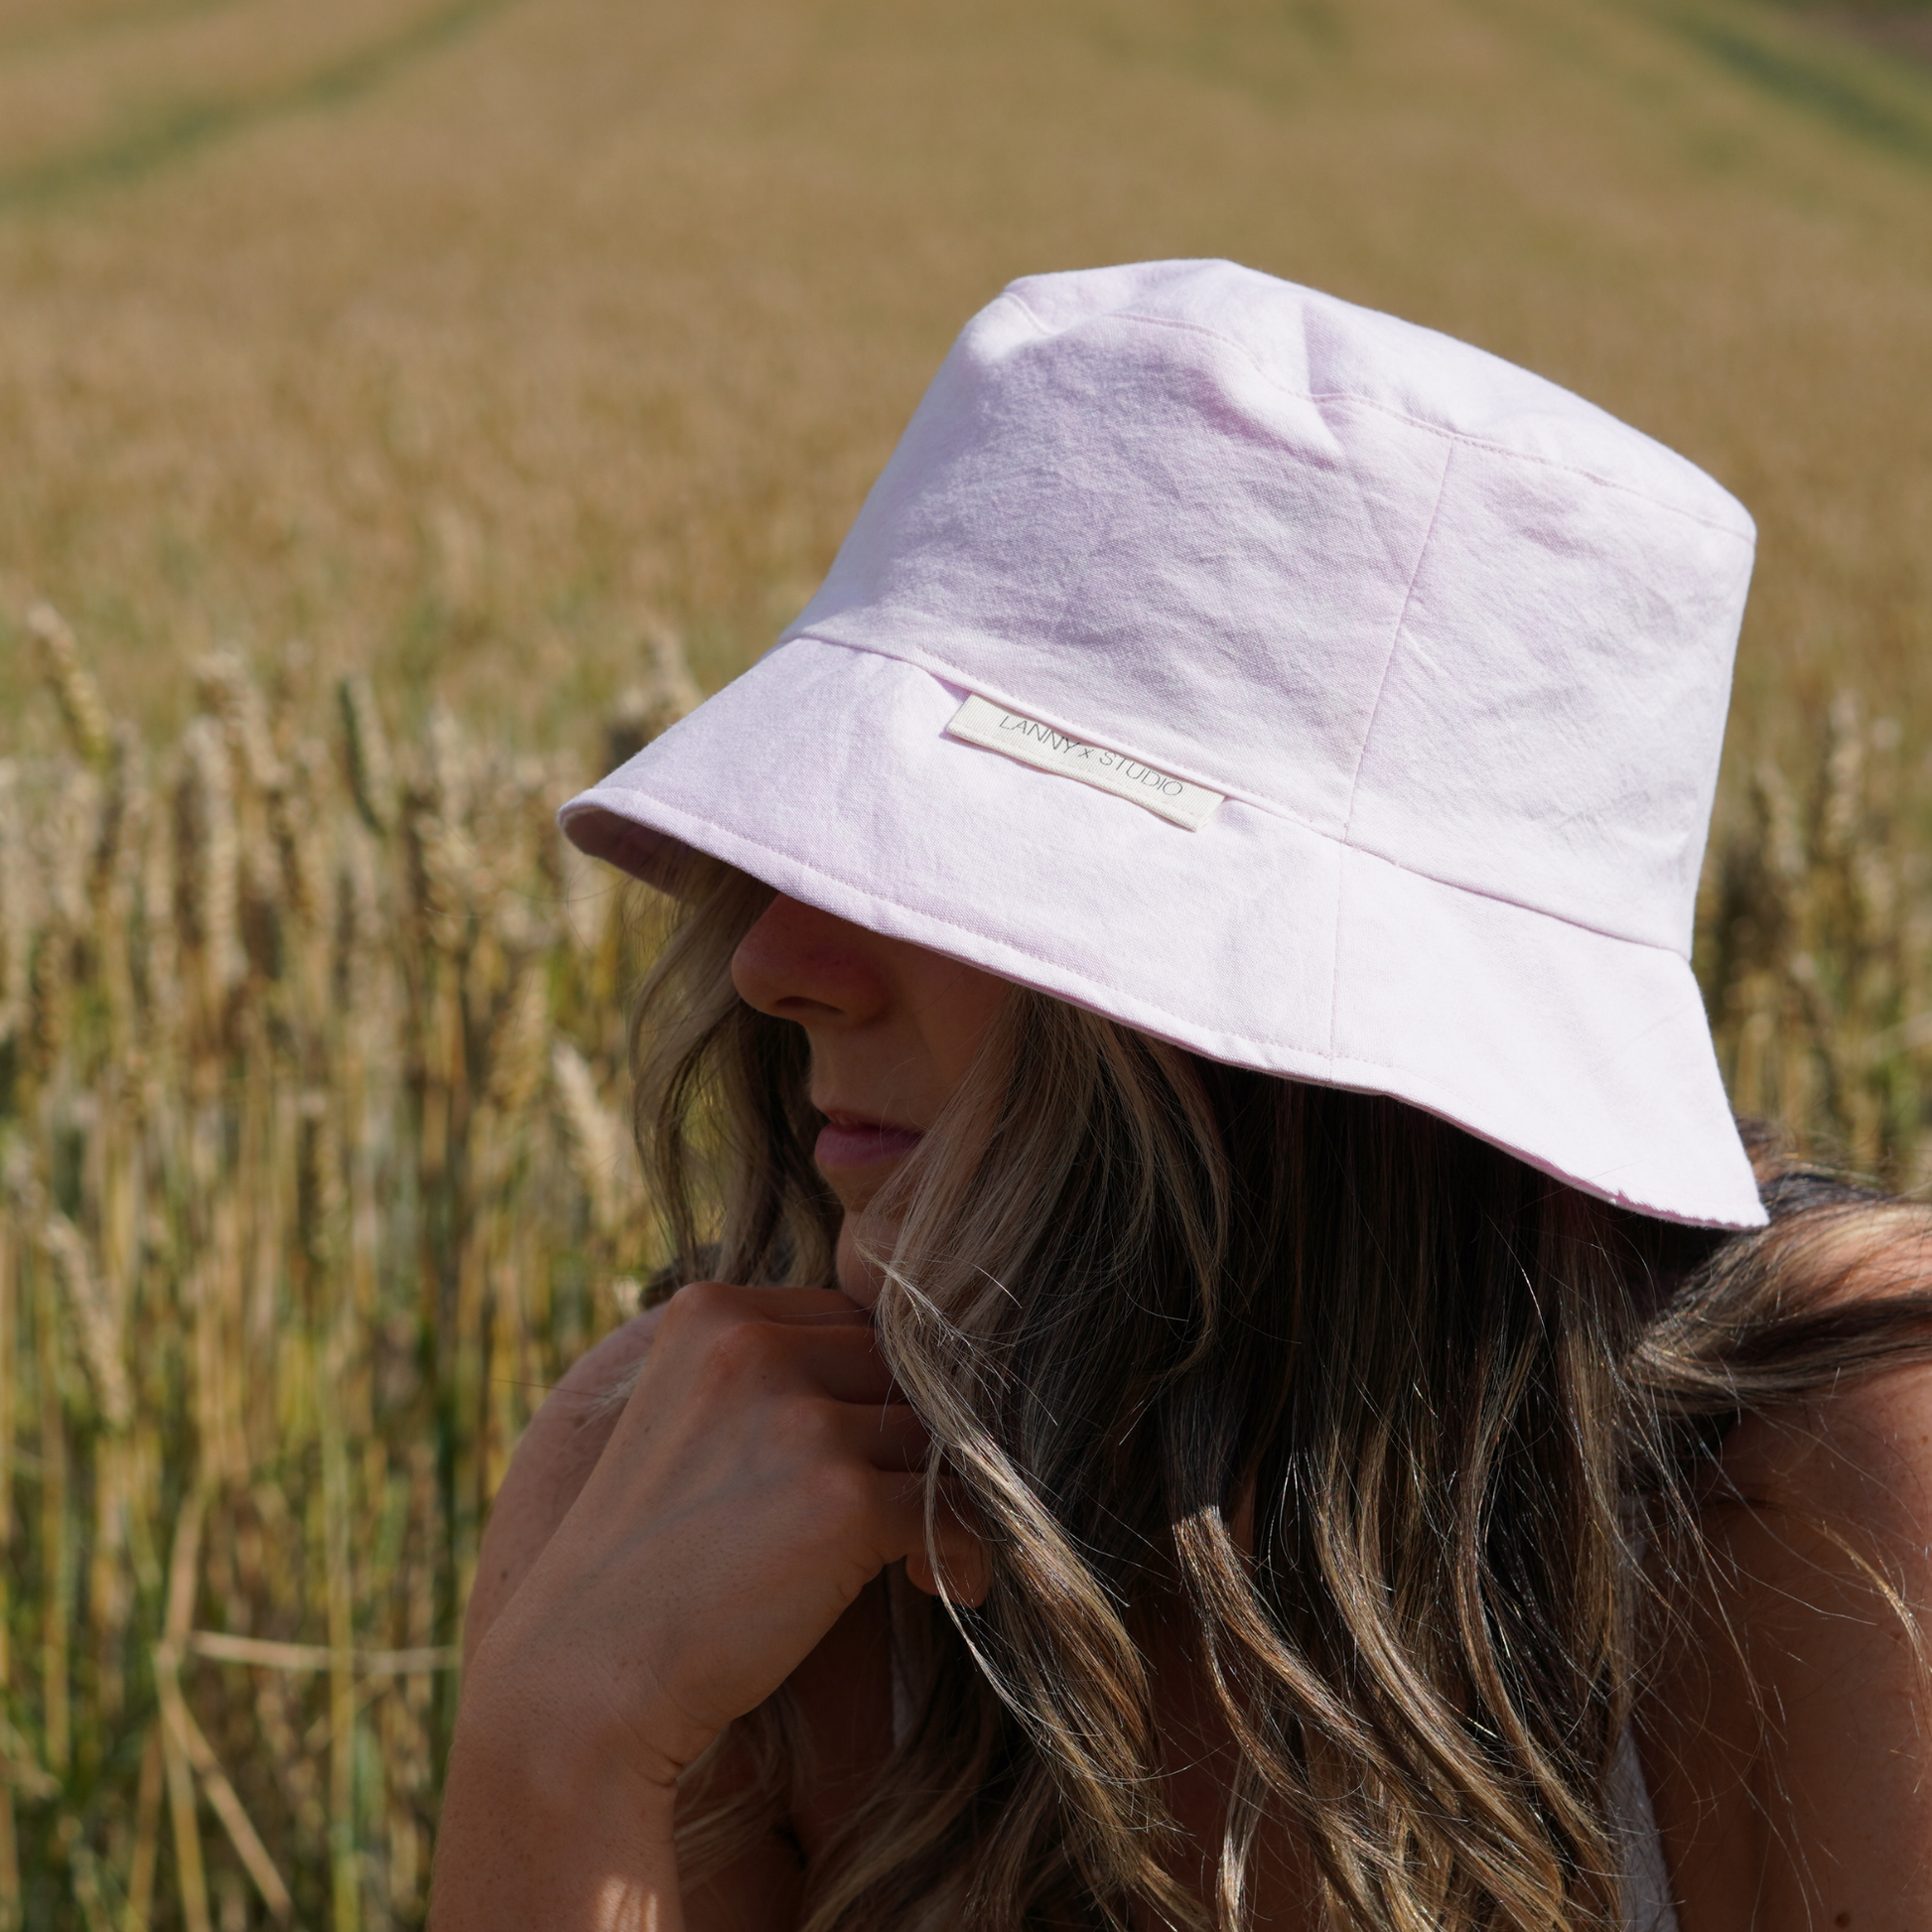 Light pink bucket hat with a subtle acid wash finish, photographed on a female with a wheat field in the background. 